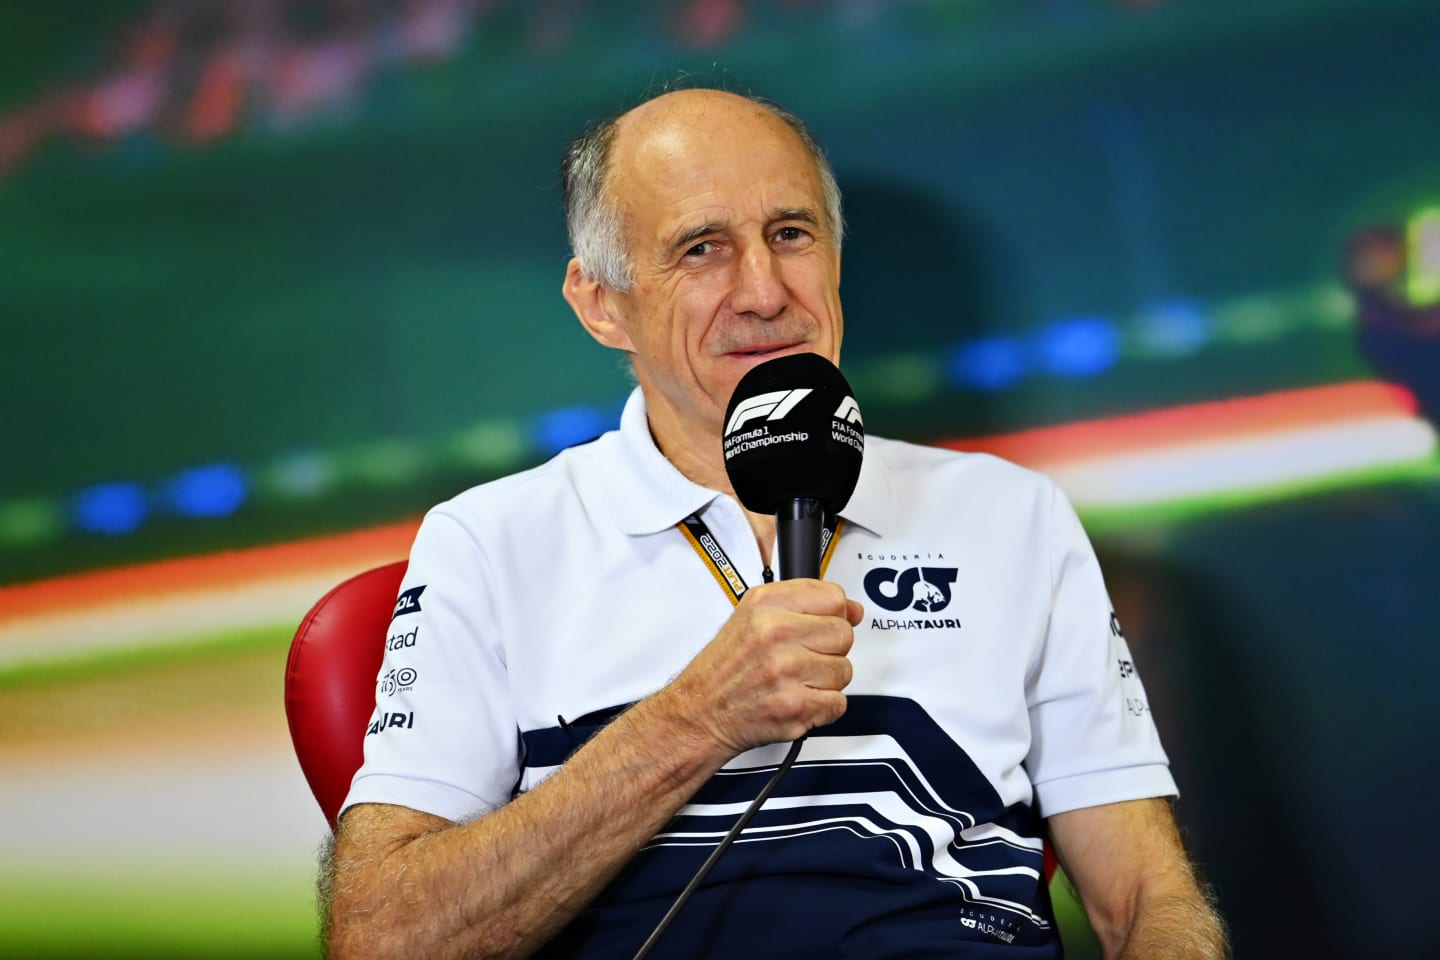 BUDAPEST, HUNGARY - JULY 30: Scuderia AlphaTauri Team Principal Franz Tost attends the Team Principals Press Conference prior to final practice ahead of the F1 Grand Prix of Hungary at Hungaroring on July 30, 2022 in Budapest, Hungary. (Photo by Dan Mullan/Getty Images)